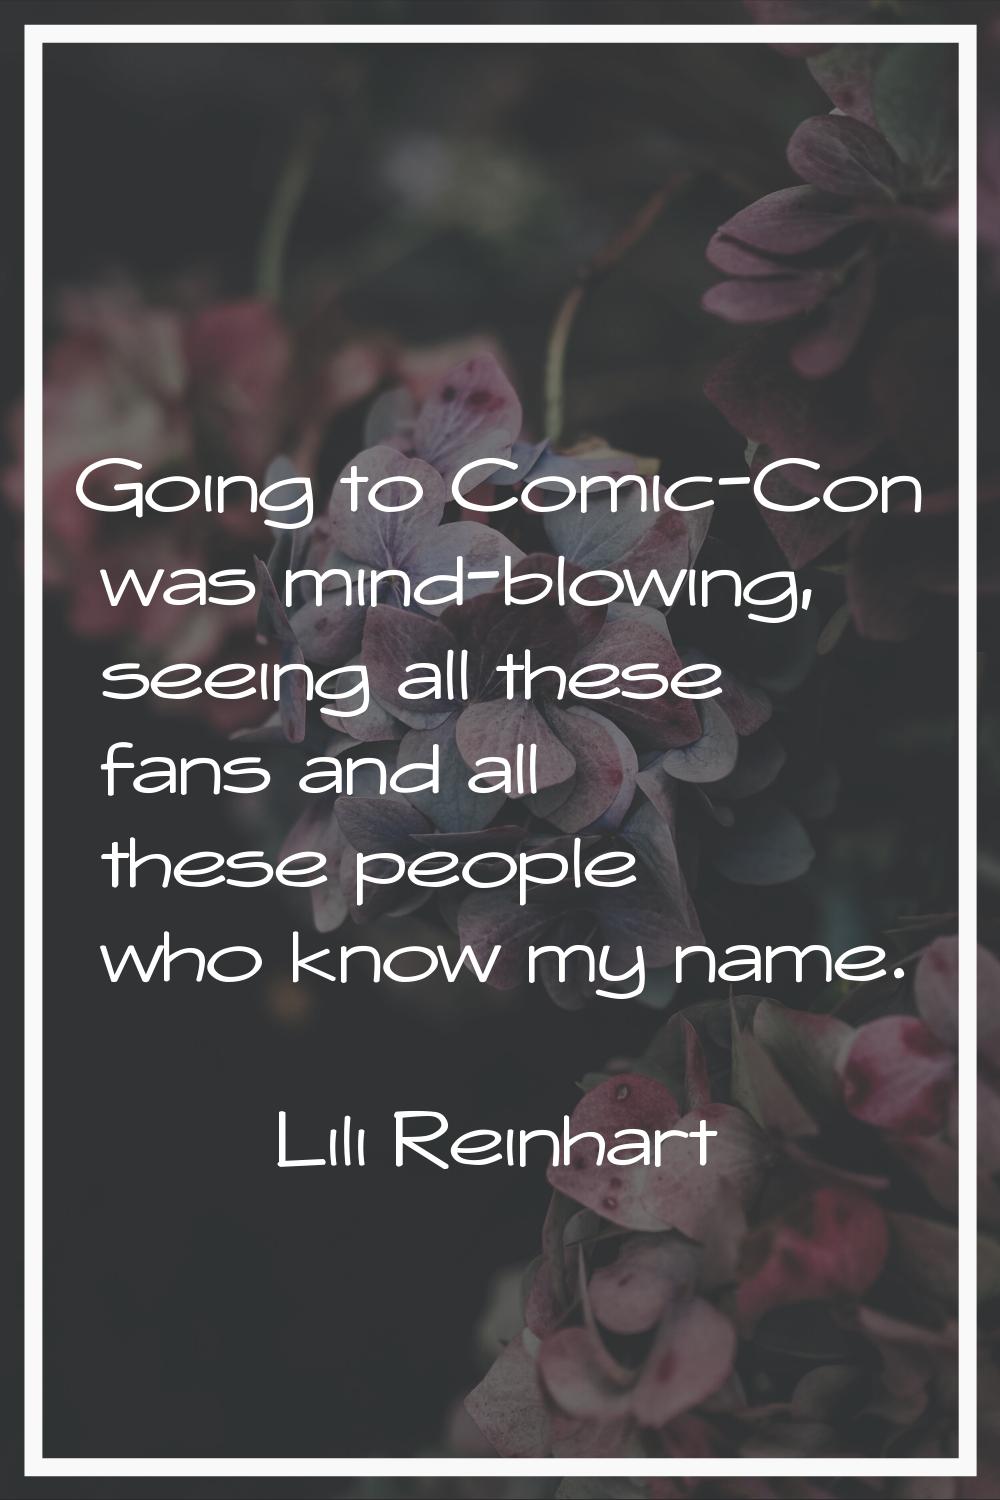 Going to Comic-Con was mind-blowing, seeing all these fans and all these people who know my name.